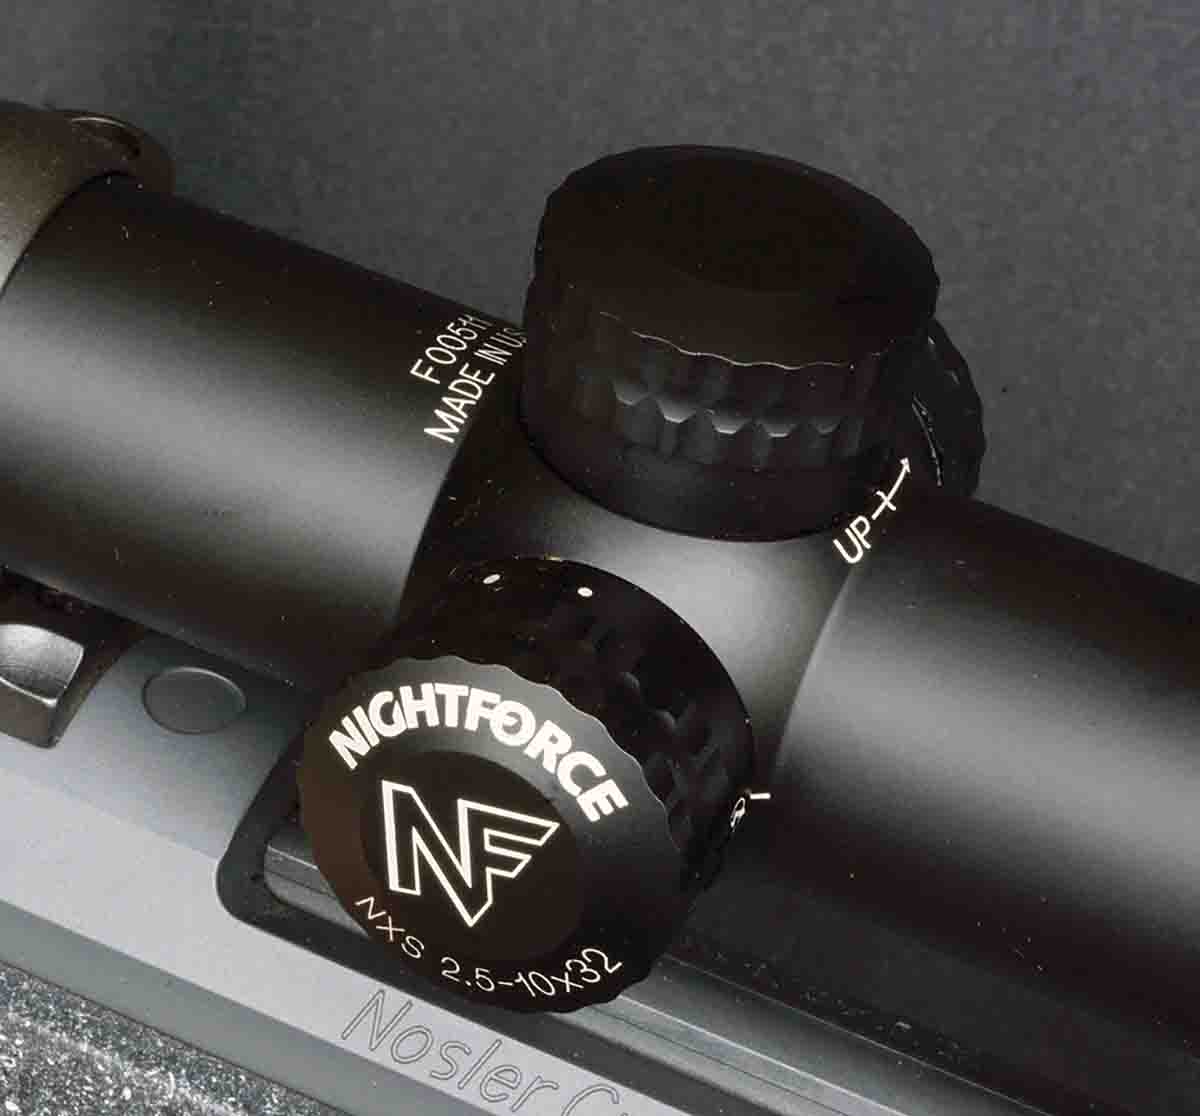 Nightforce riflescopes today represent the state-of-the-art in sniper equipment.